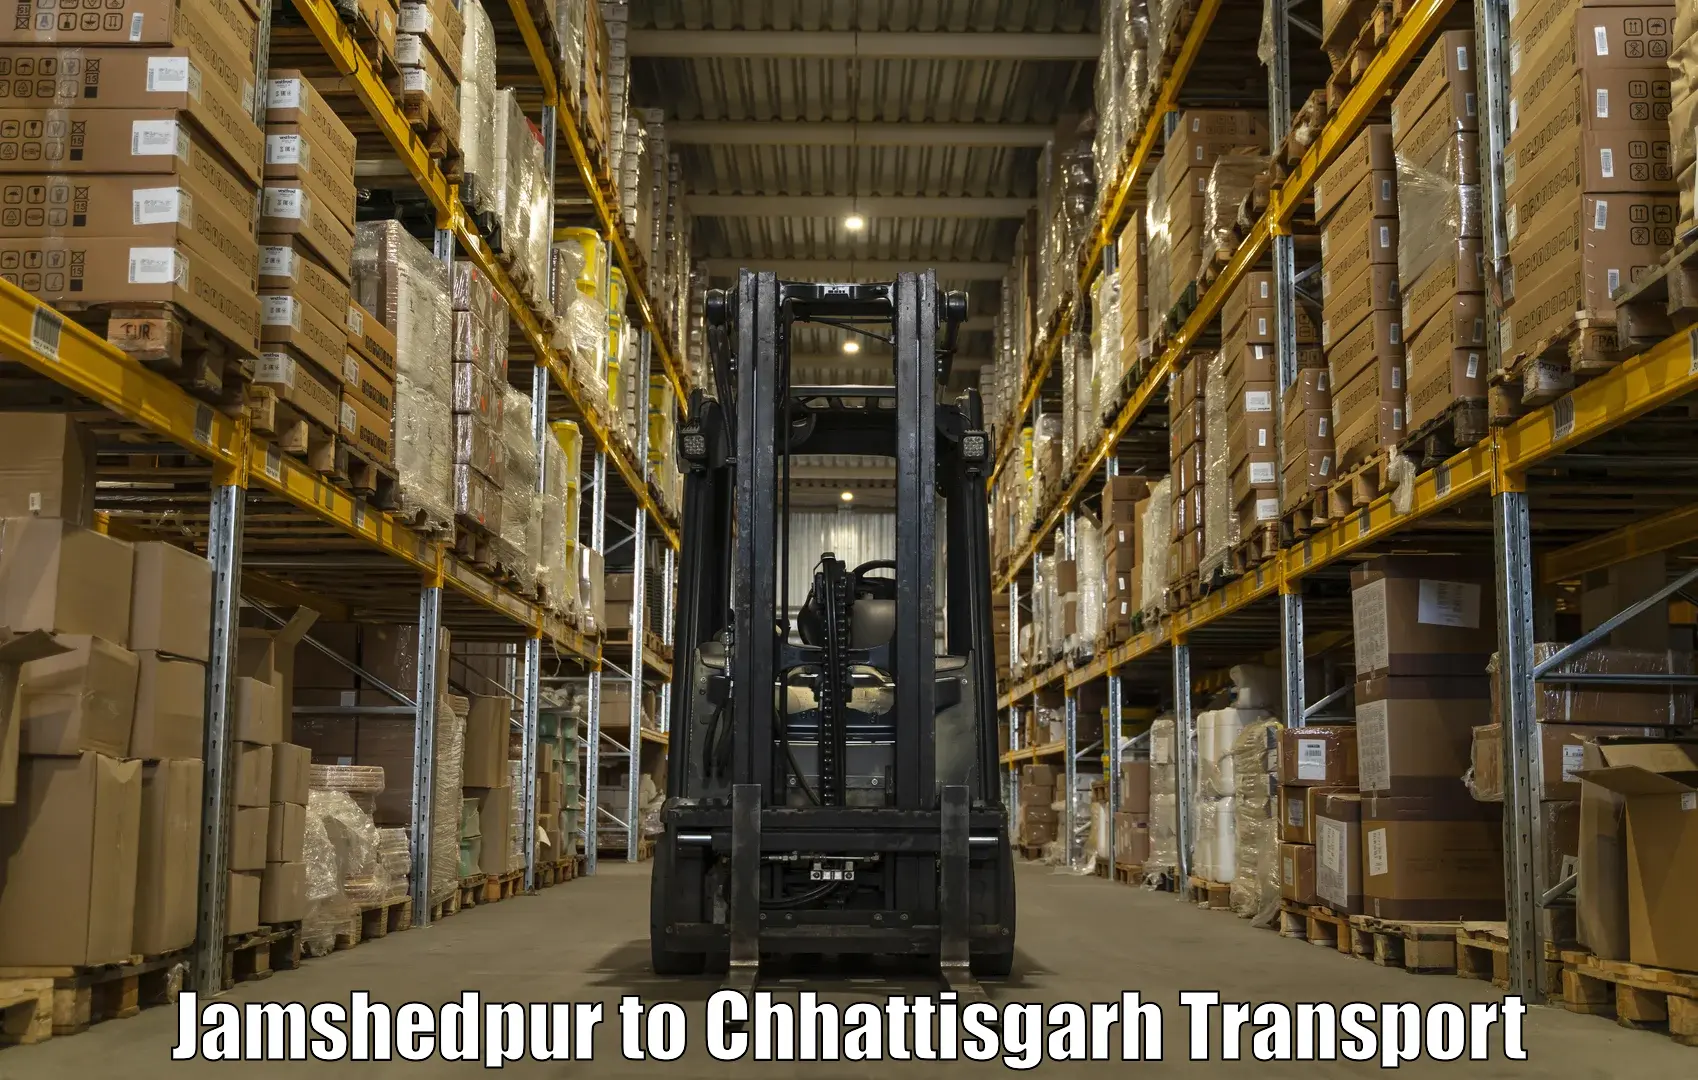 Transport bike from one state to another Jamshedpur to Raigarh